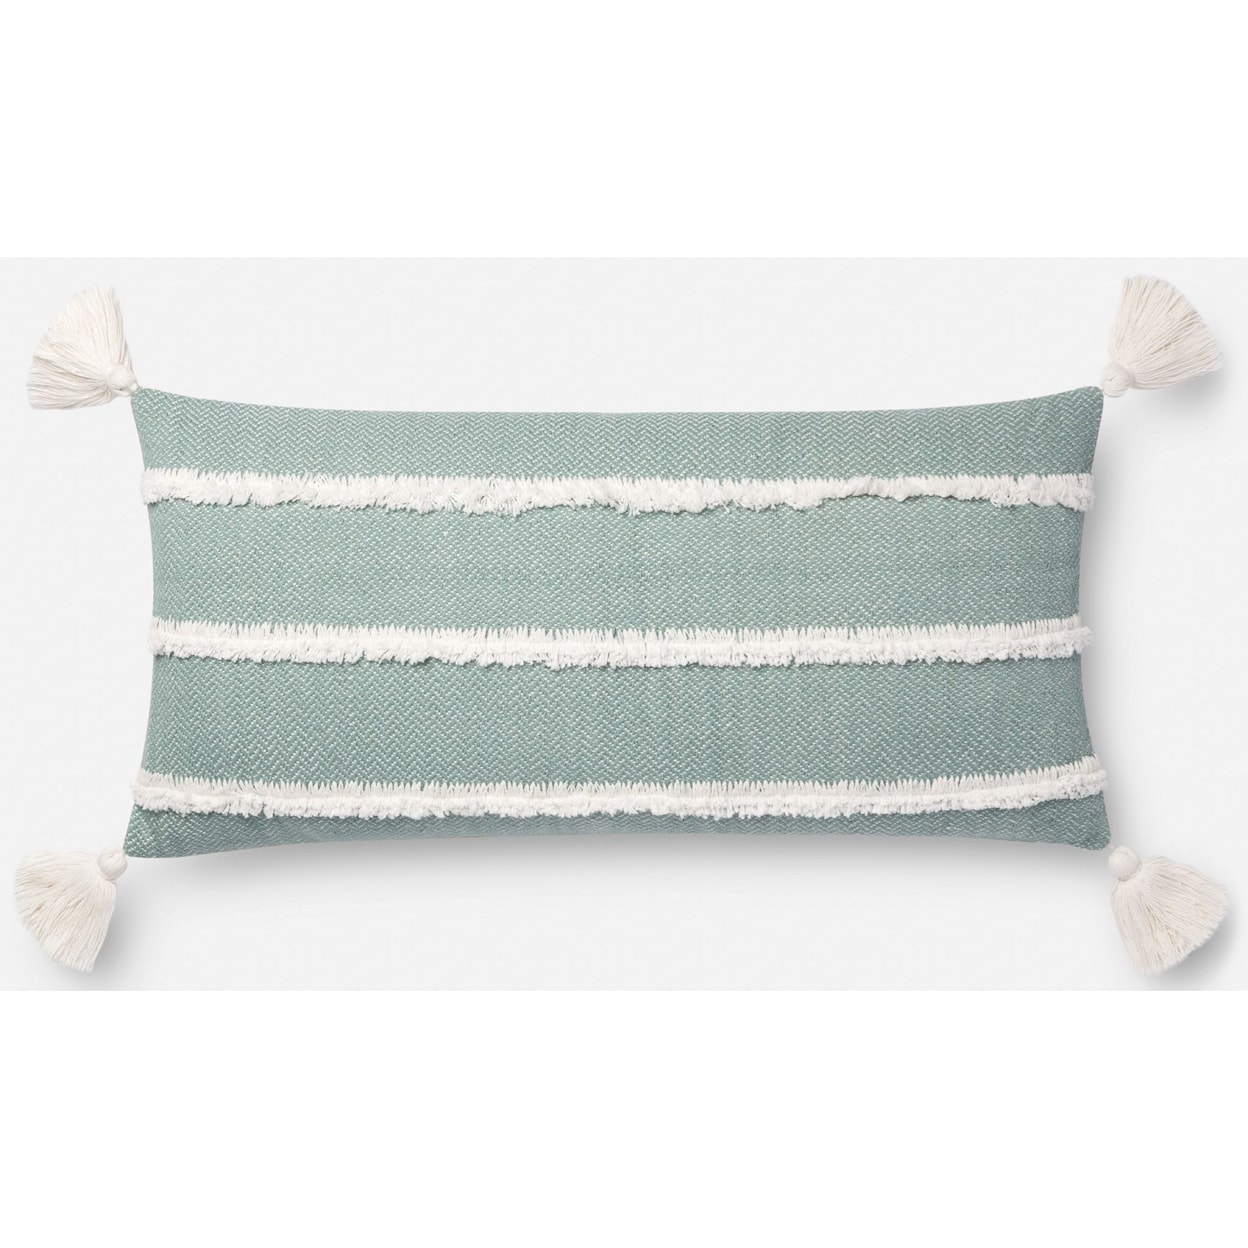 Magnolia Home by Joanna Gaines for Loloi Accent Pillows 12" x 27" Down Pillow